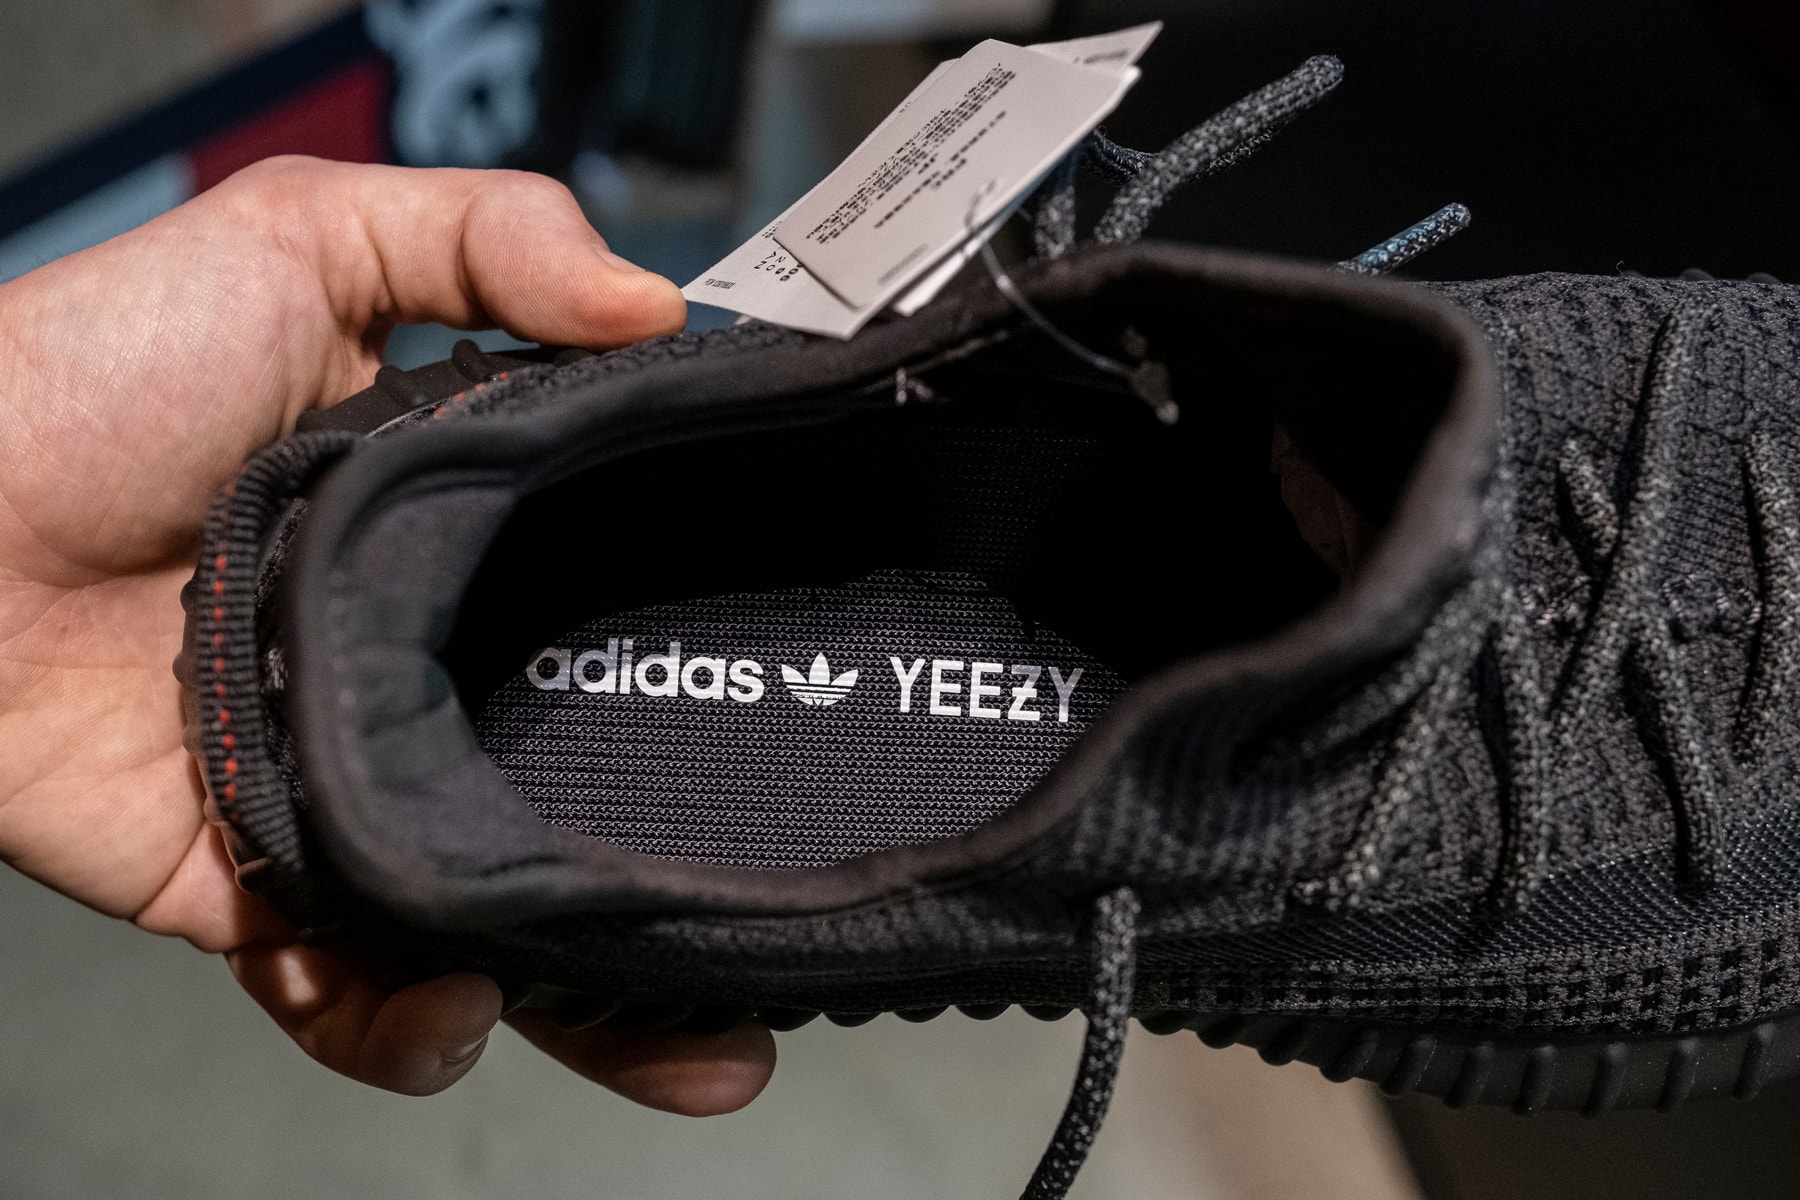 Yeezy adidas Sneakers pulled from Foot Locker retail stores and online news  ye kanye west footwear sneakers shoes 